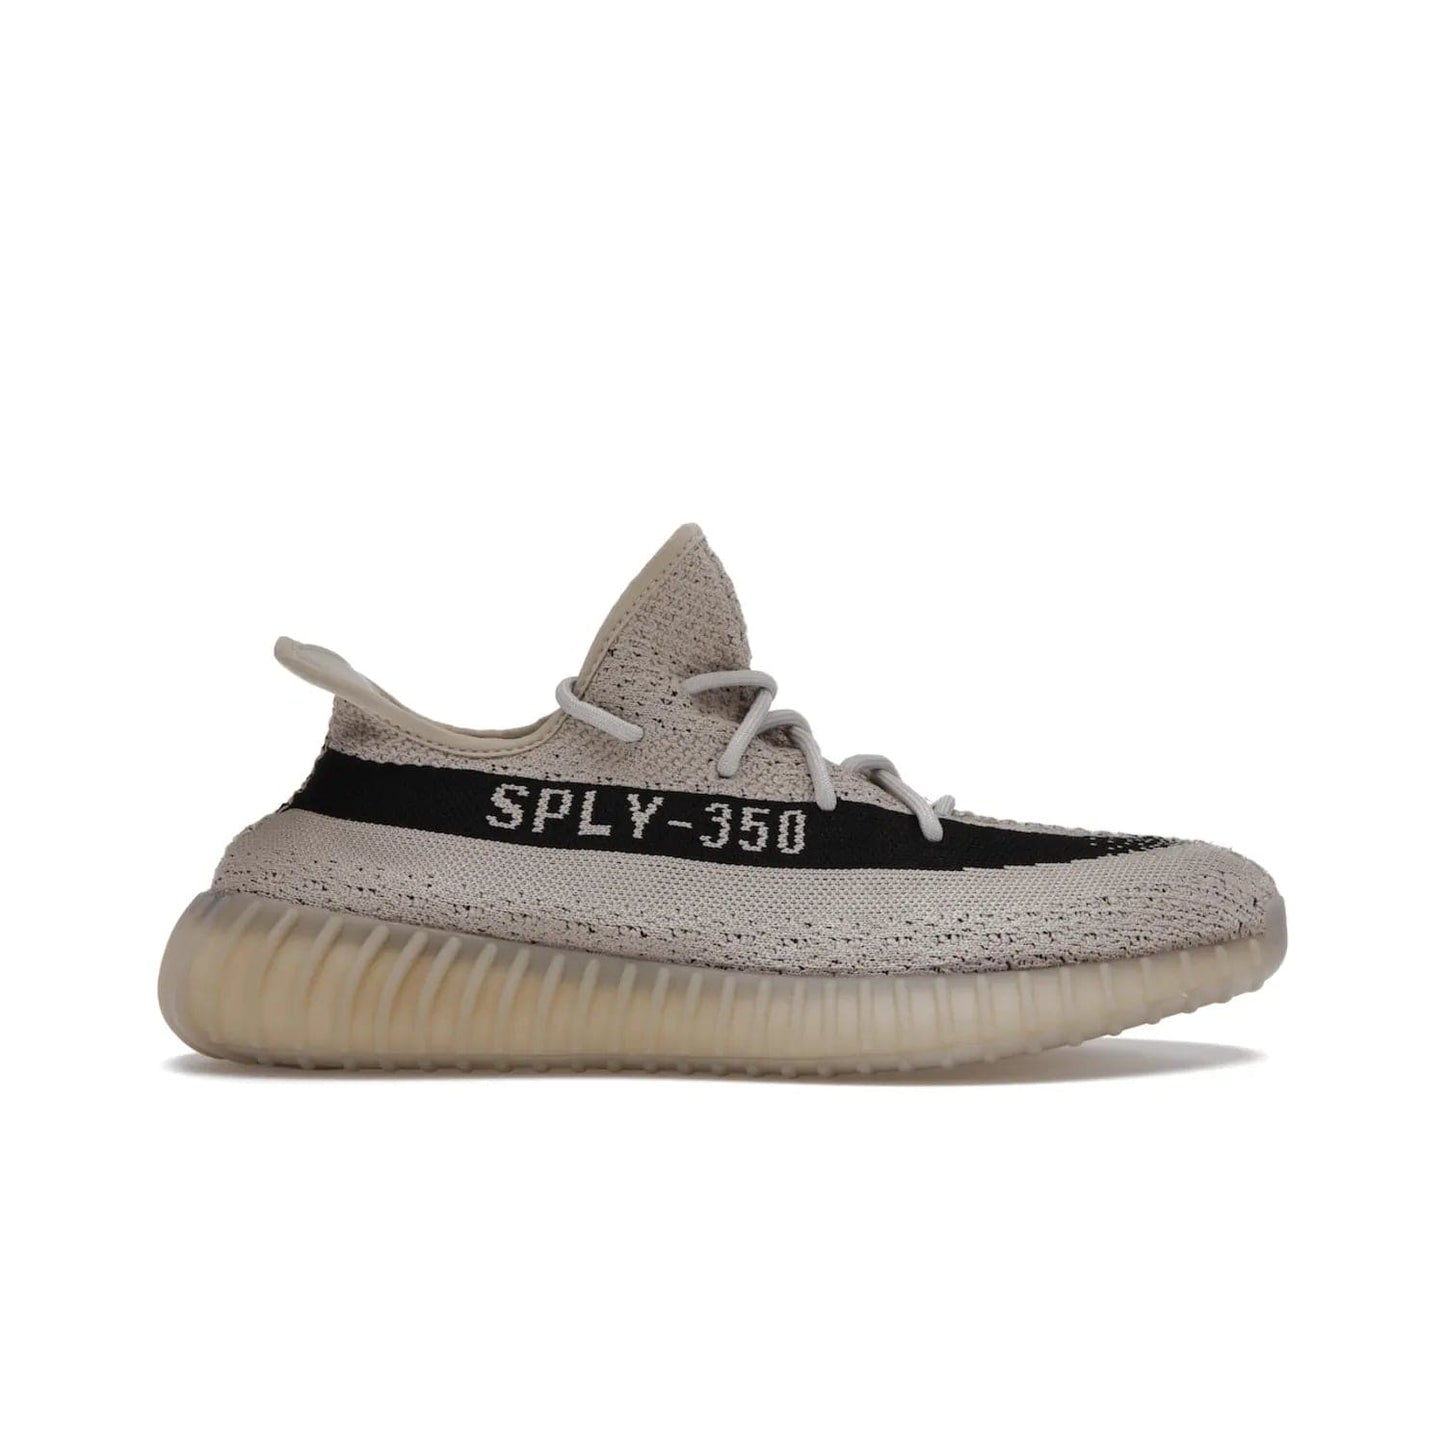 adidas Yeezy Boost 350 V2 Slate - Image 1 - Only at www.BallersClubKickz.com - Adidas Yeezy Boost 350 V2 Slate Core Black Slate featuring Primeknit upper, Boost midsole and semi-translucent TPU cage. Launched on 3/9/2022, retailed at $230.